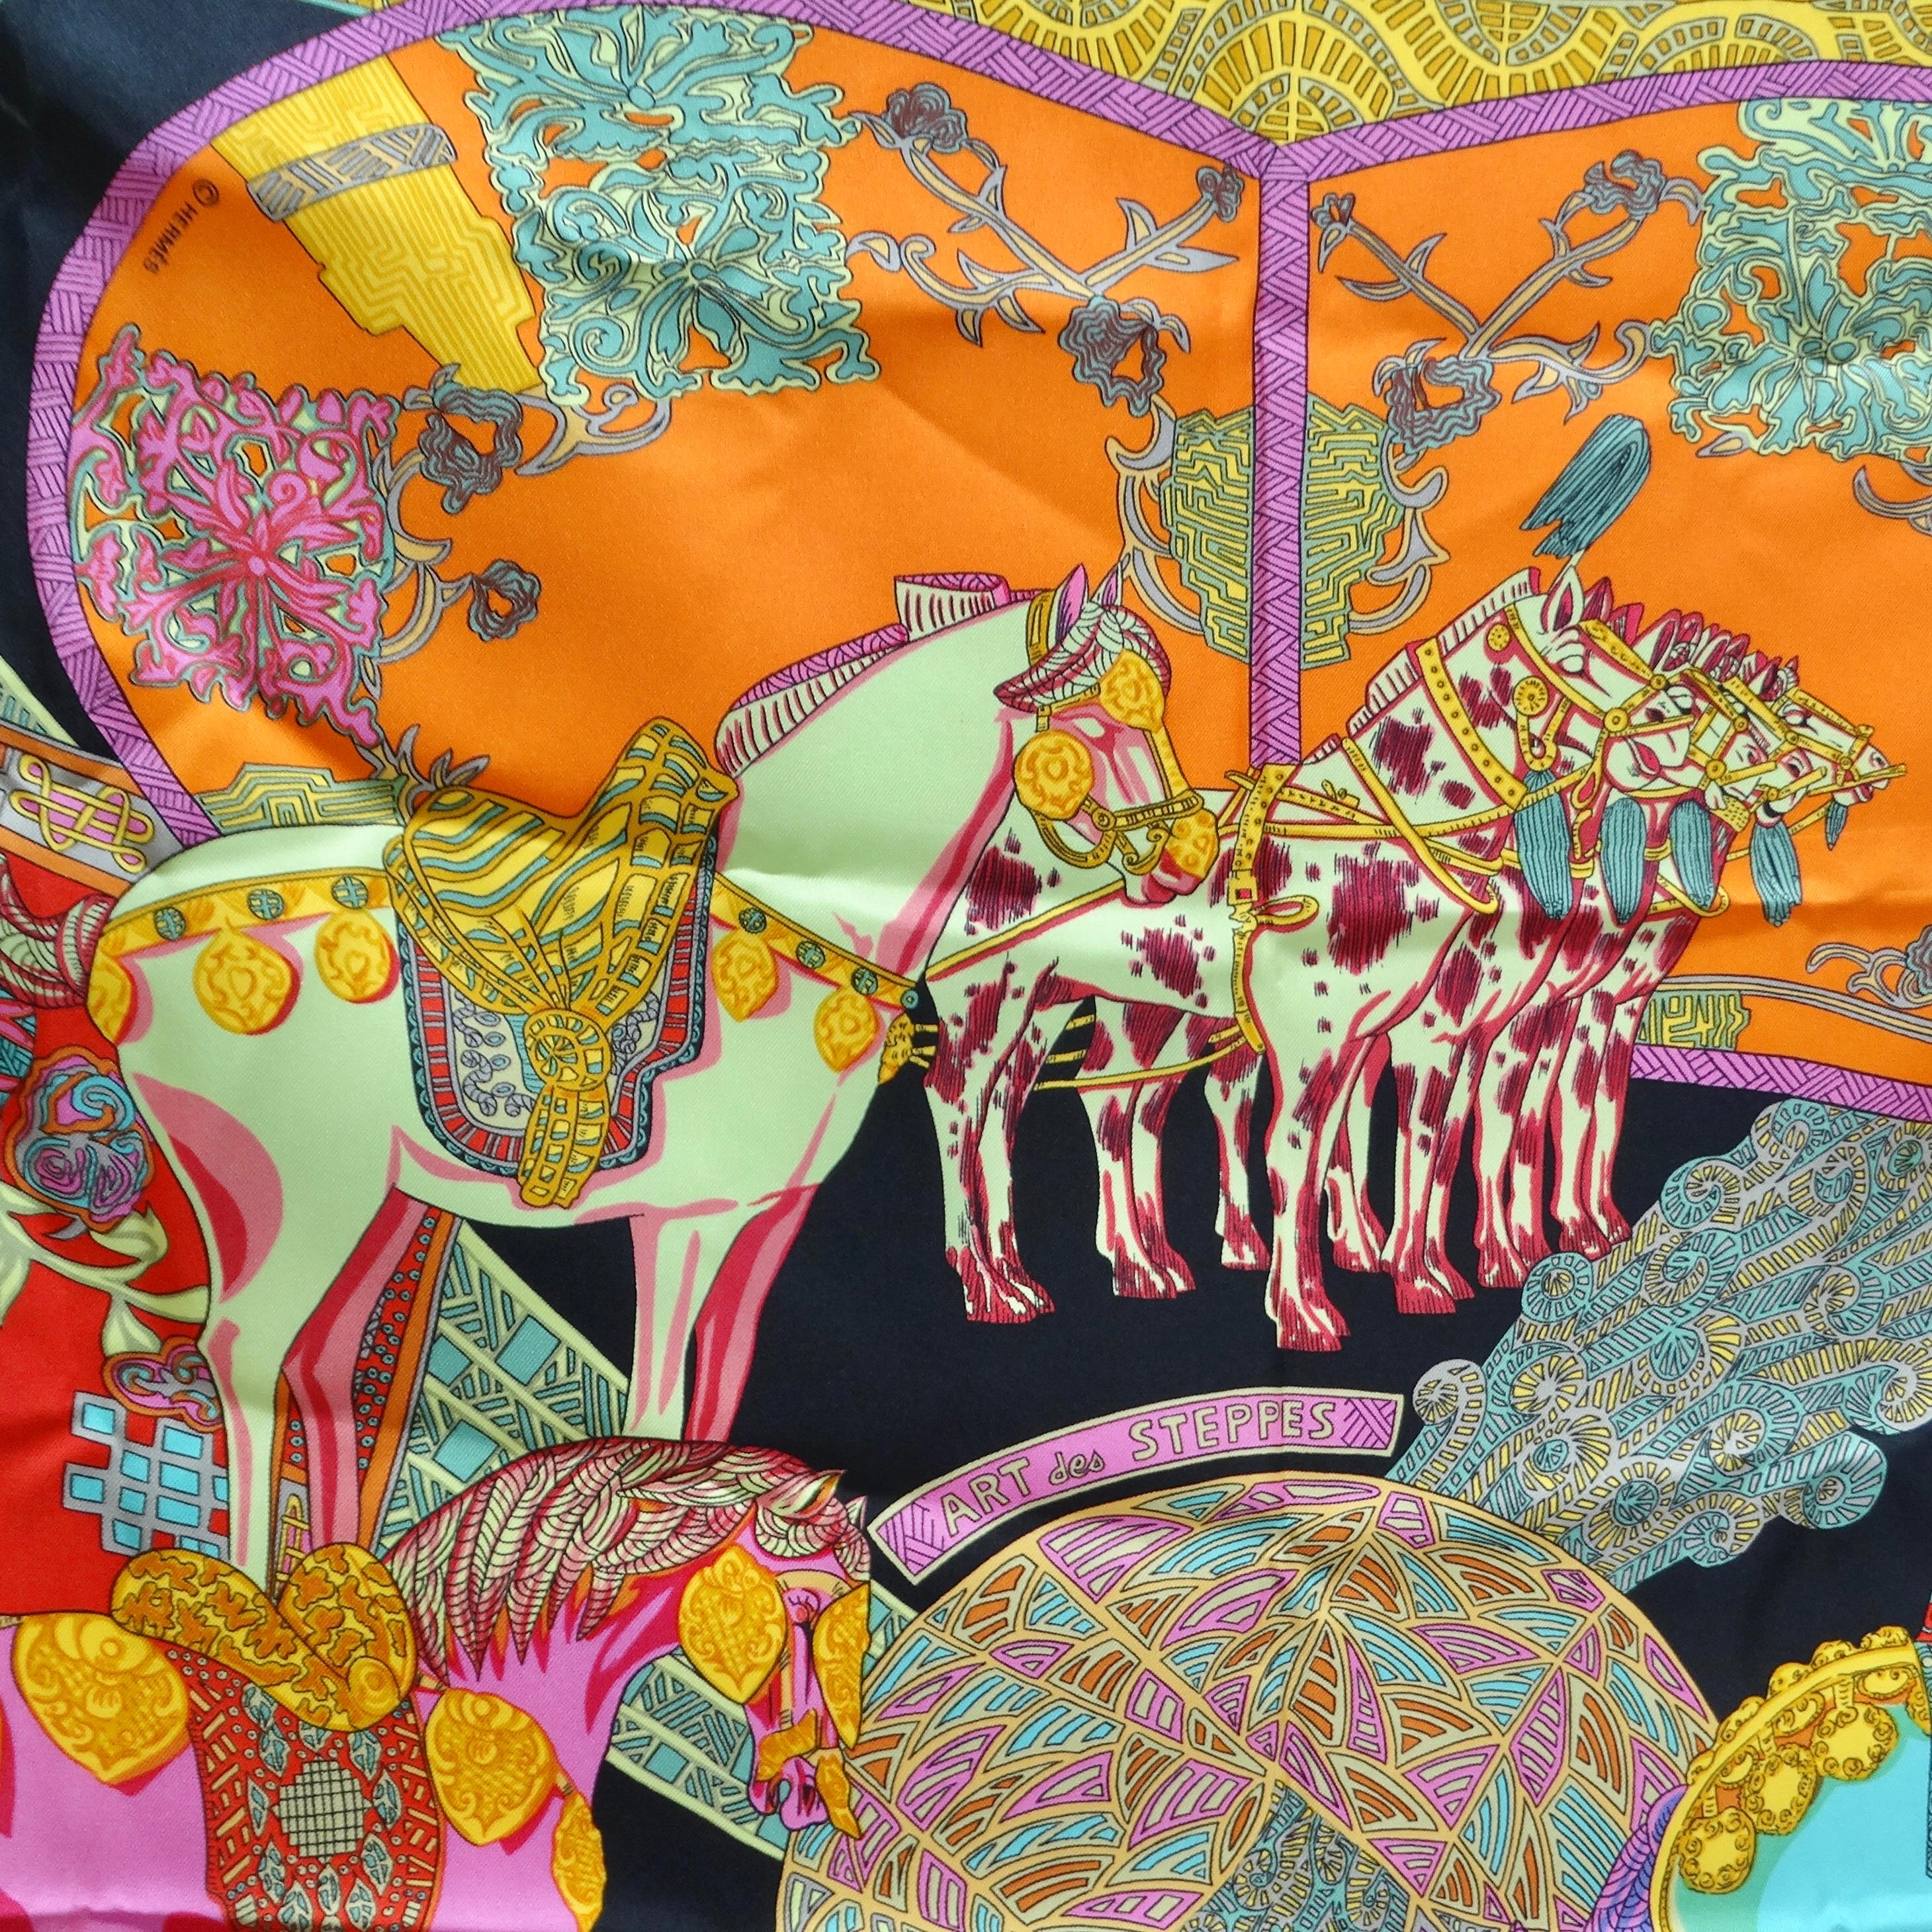 Hermes Art Des Steppes Silk Scarf In Excellent Condition For Sale In Scottsdale, AZ